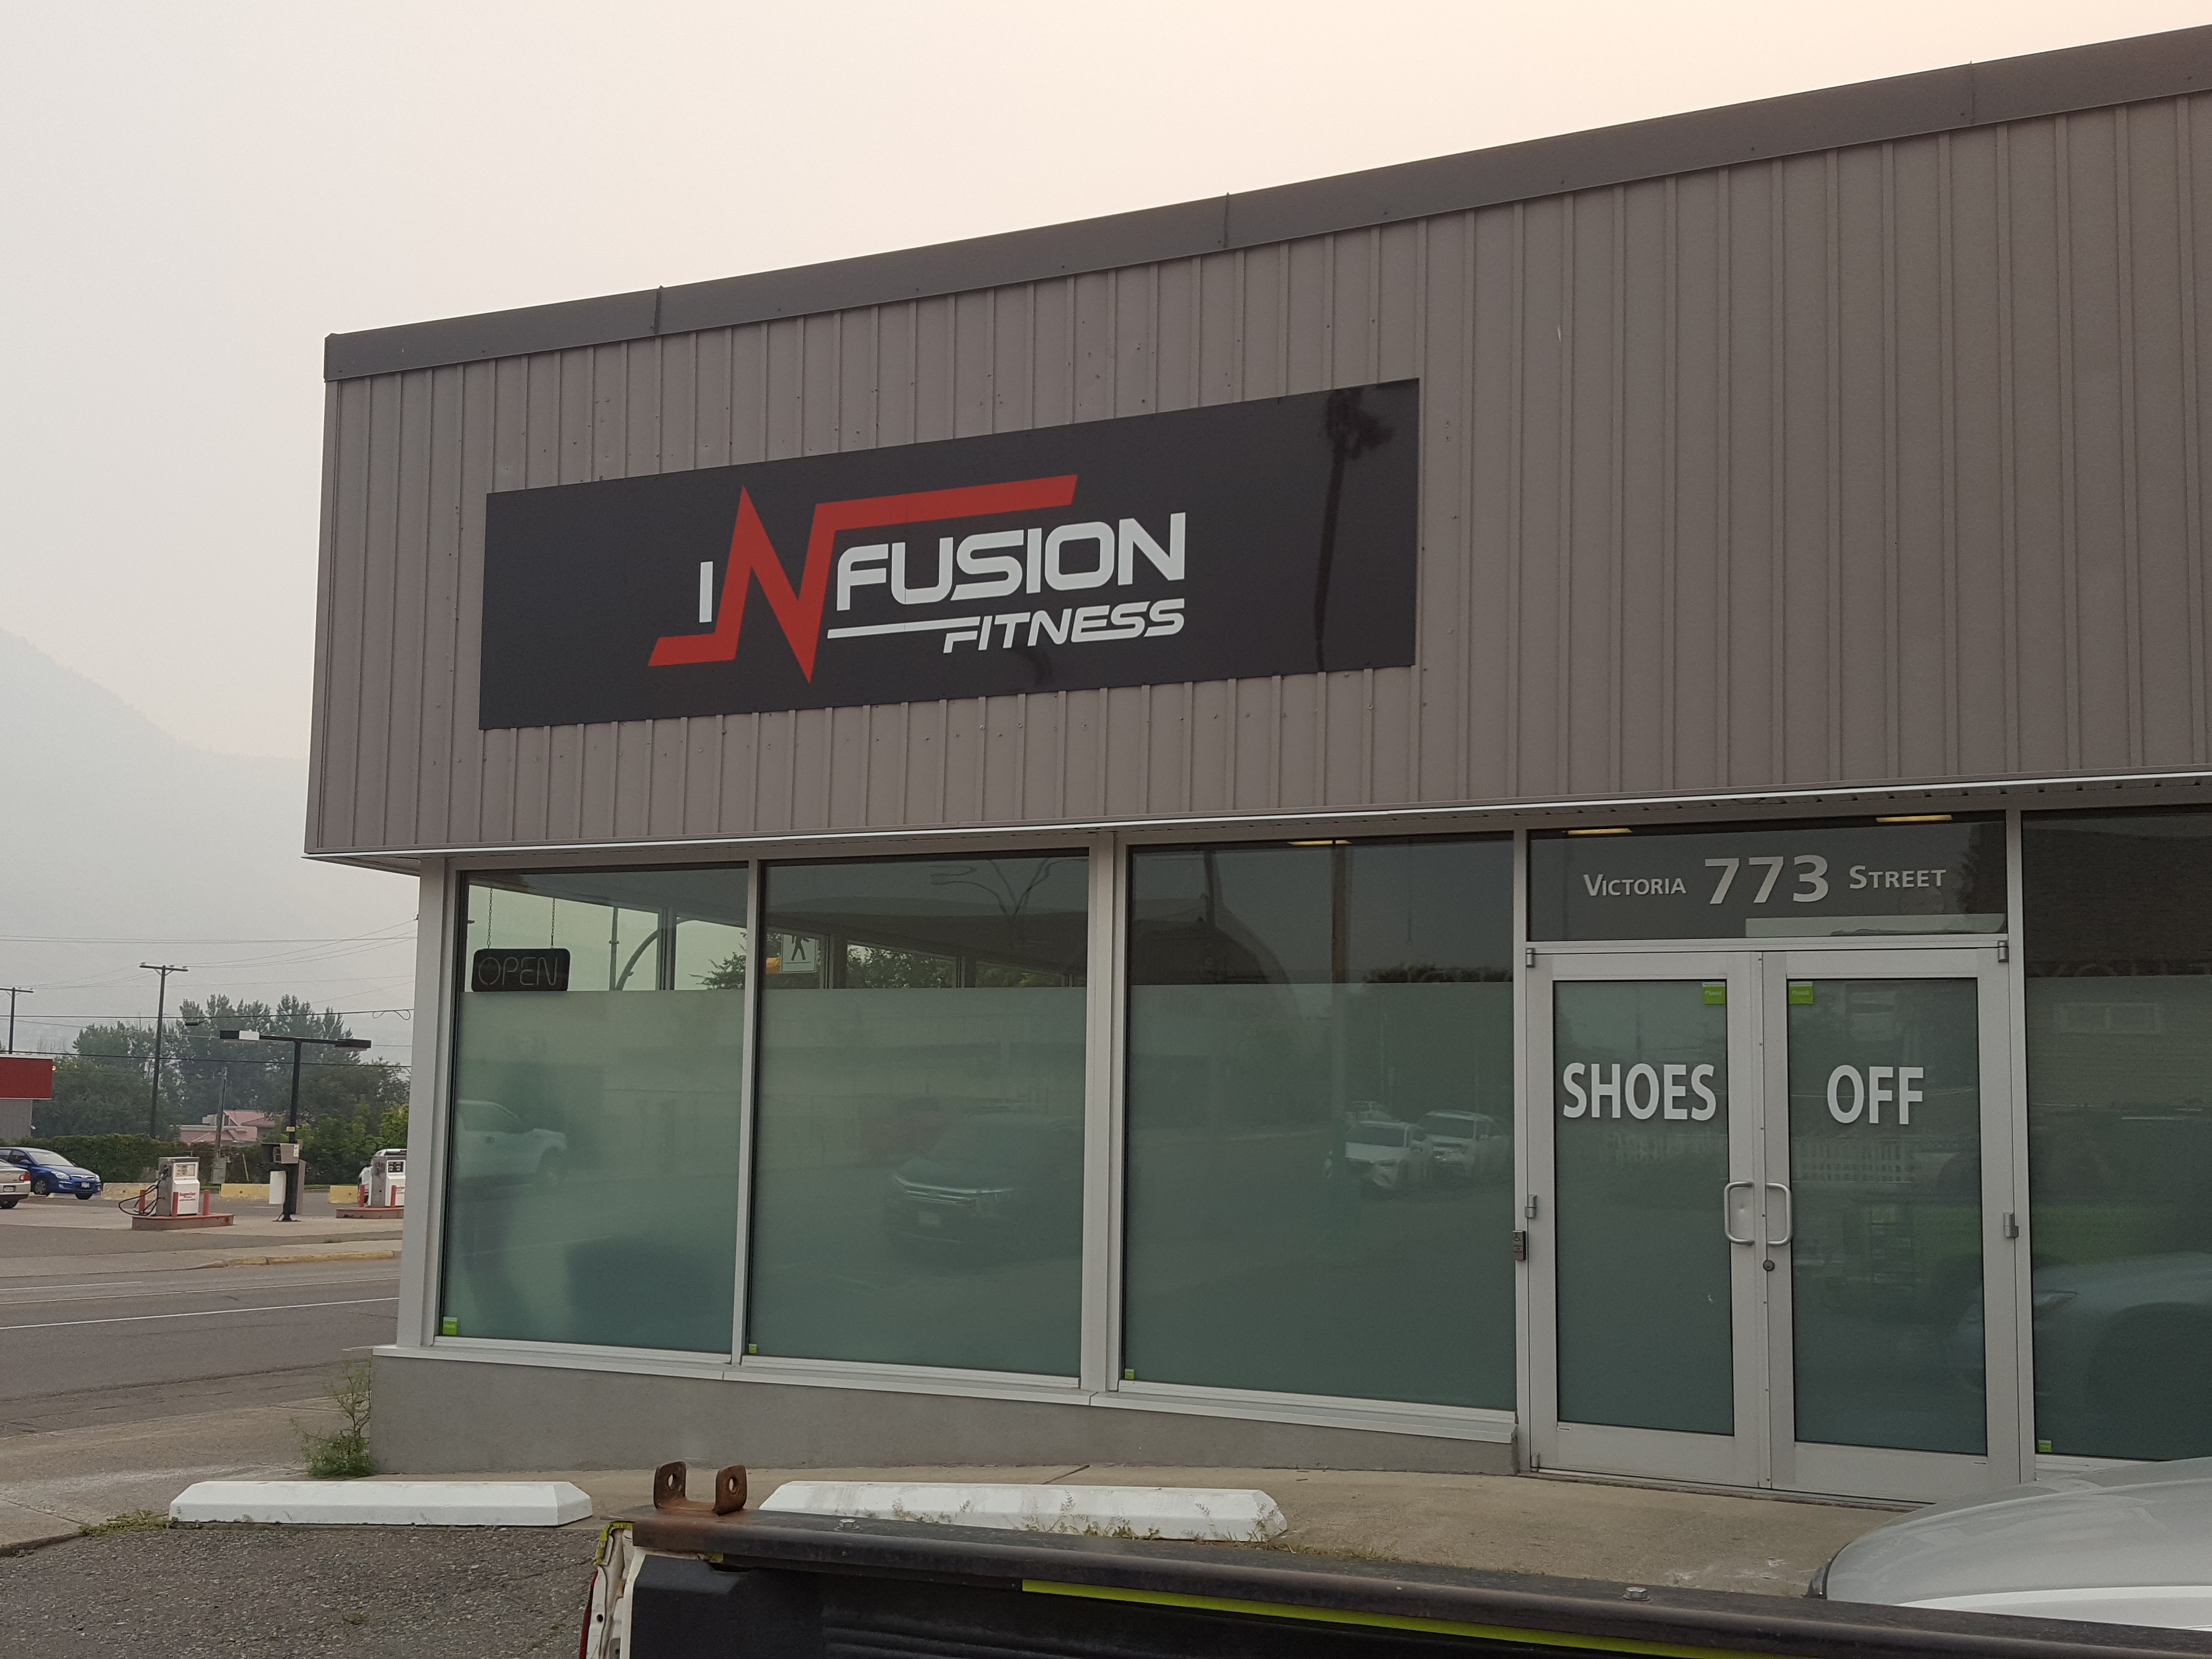 Infusion Fitness Kamloops Signage 